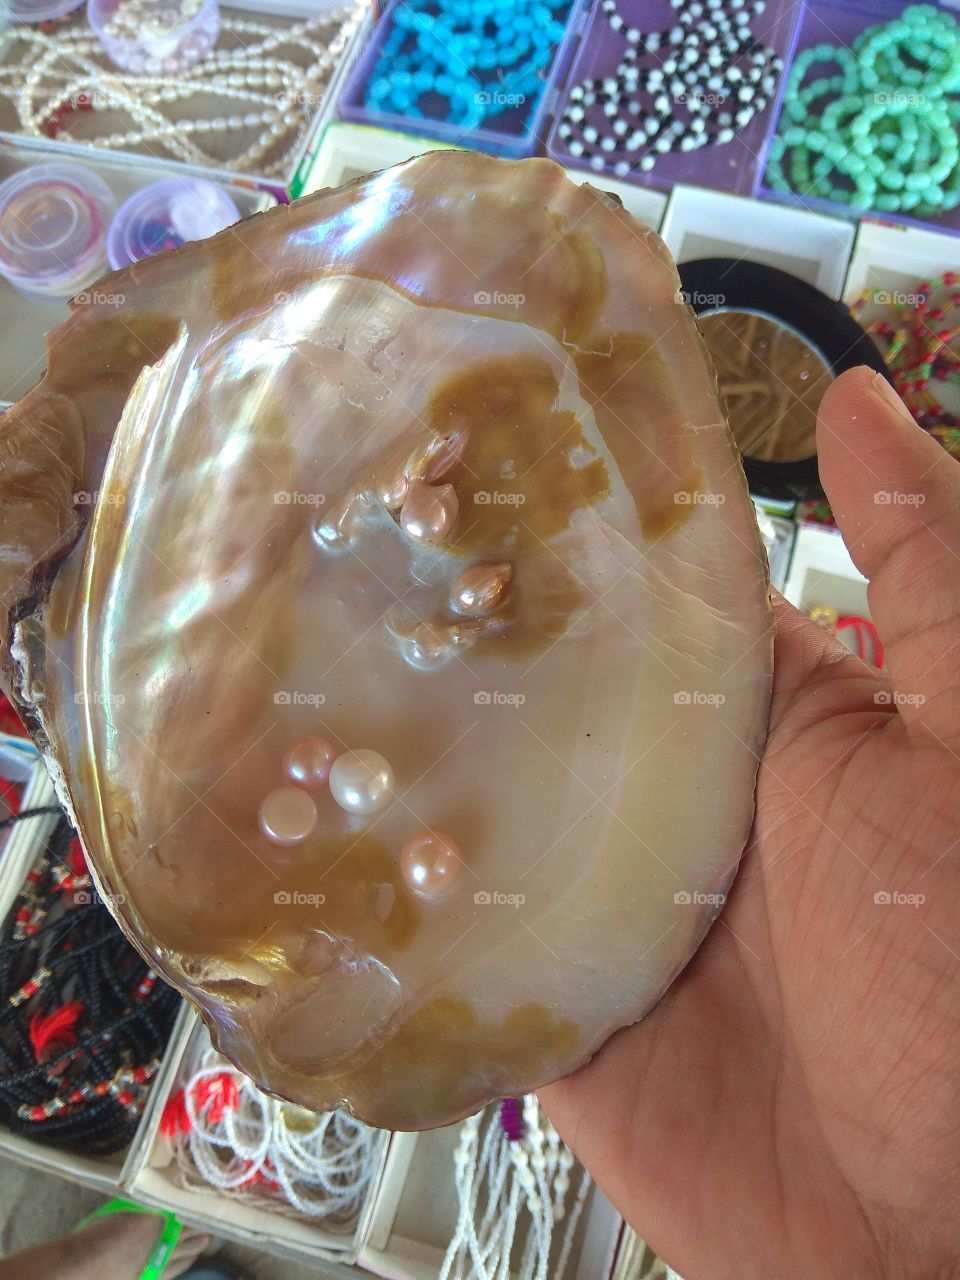 Natural Pearls form when an irritant - usually a parasite works its way into an oyster, mussel, or clam. As a defense mechanism, a fluid is used to coat the irritant. Layer upon layer of this coating, called 'nacre', is deposited until a lustrous pearl is formed.